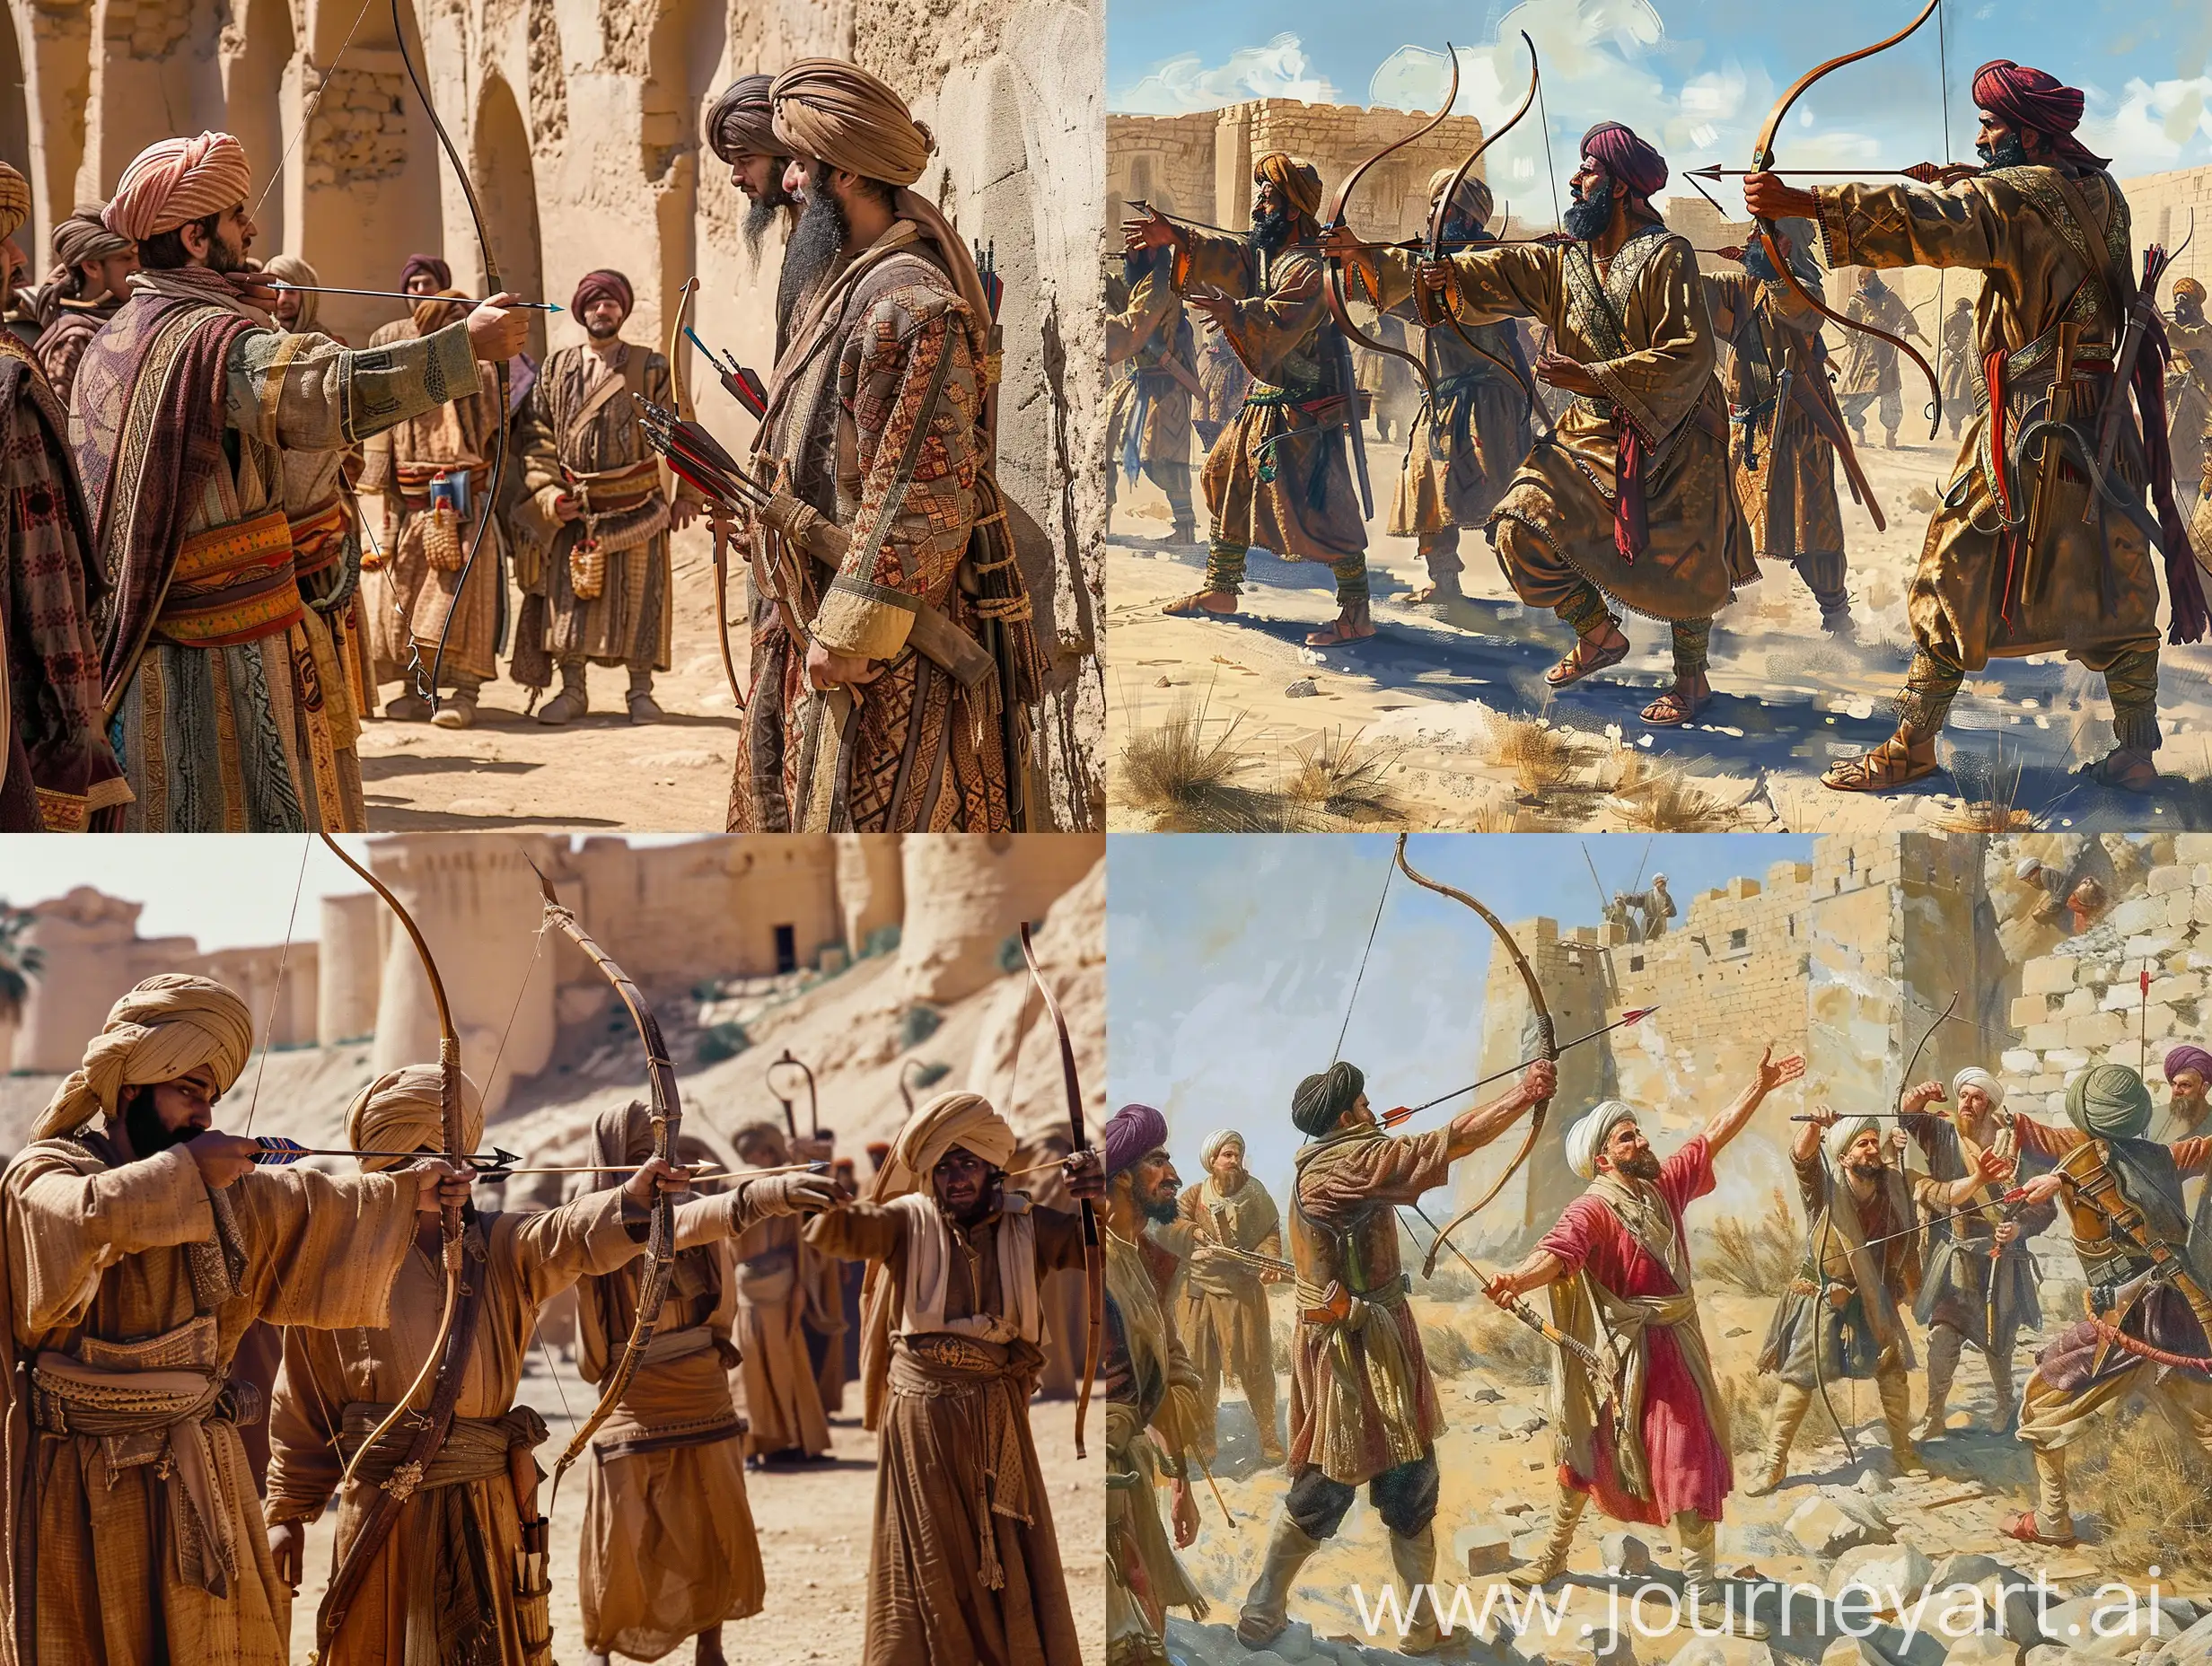 Persian-Archers-Surrendering-to-Parthian-Soldier-at-Arge-Bam-Fortress